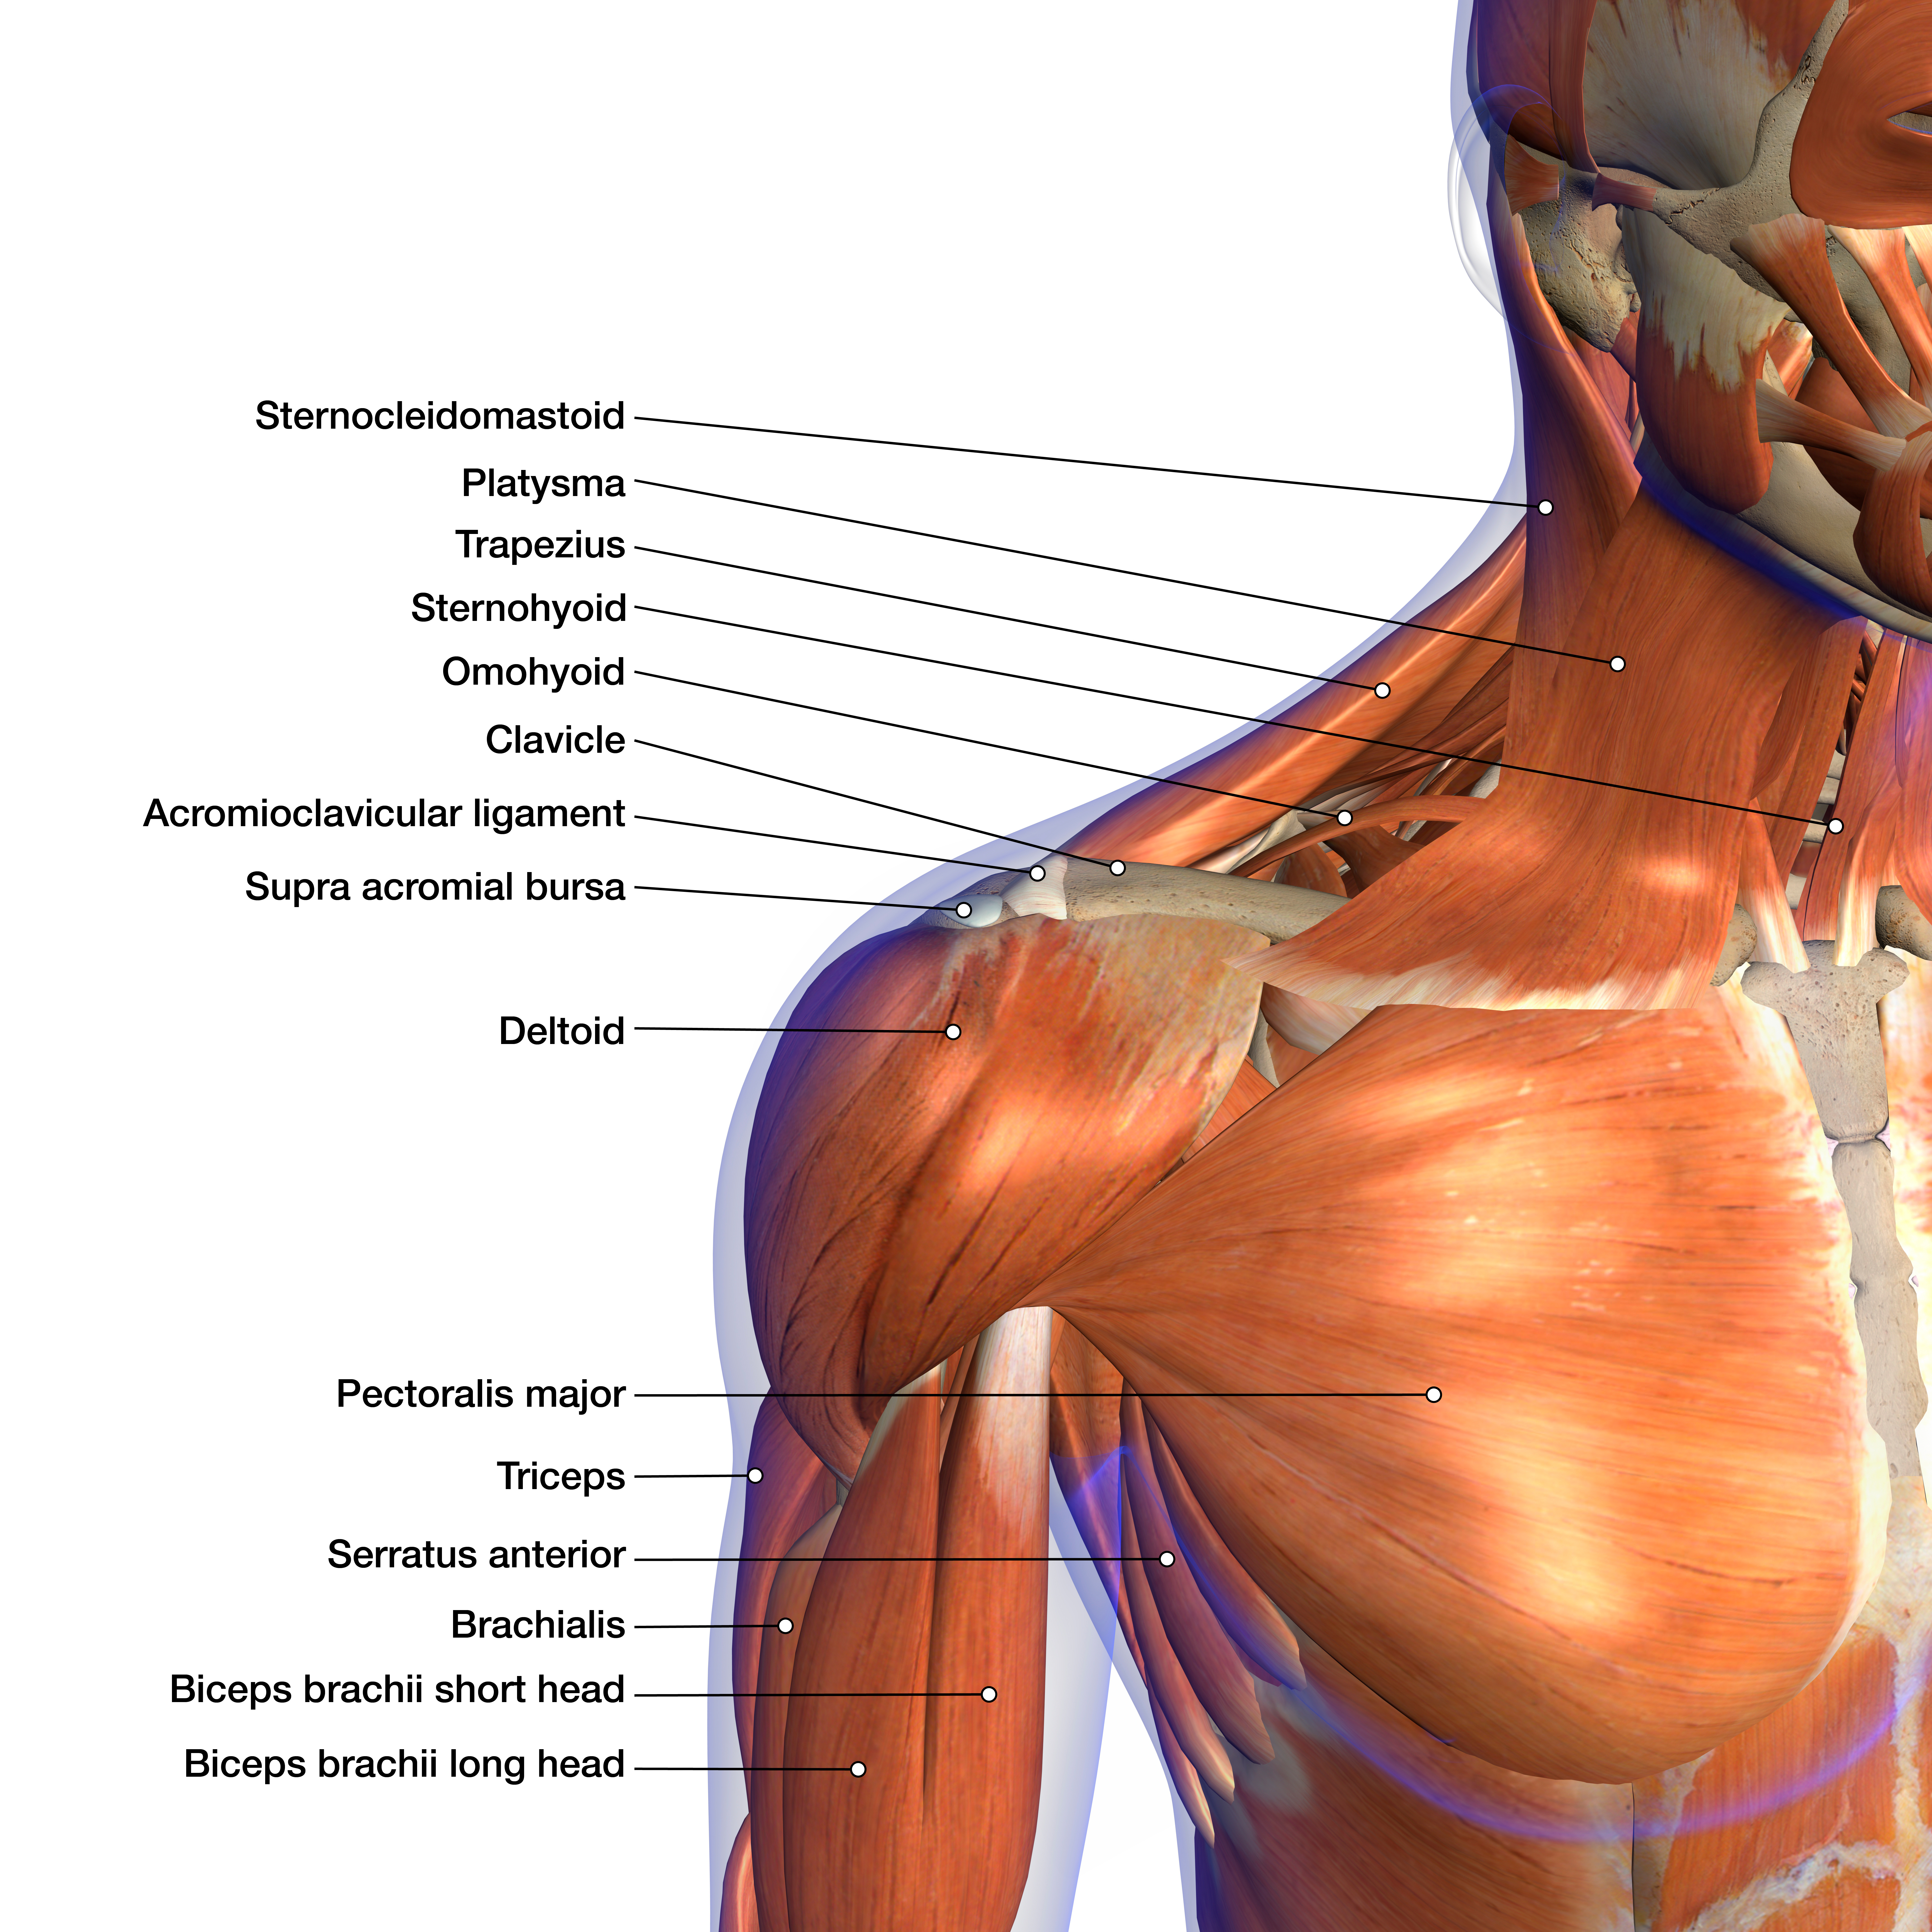 Labeled Anatomy Chart of Neck and Shoulder Muscles on White Back